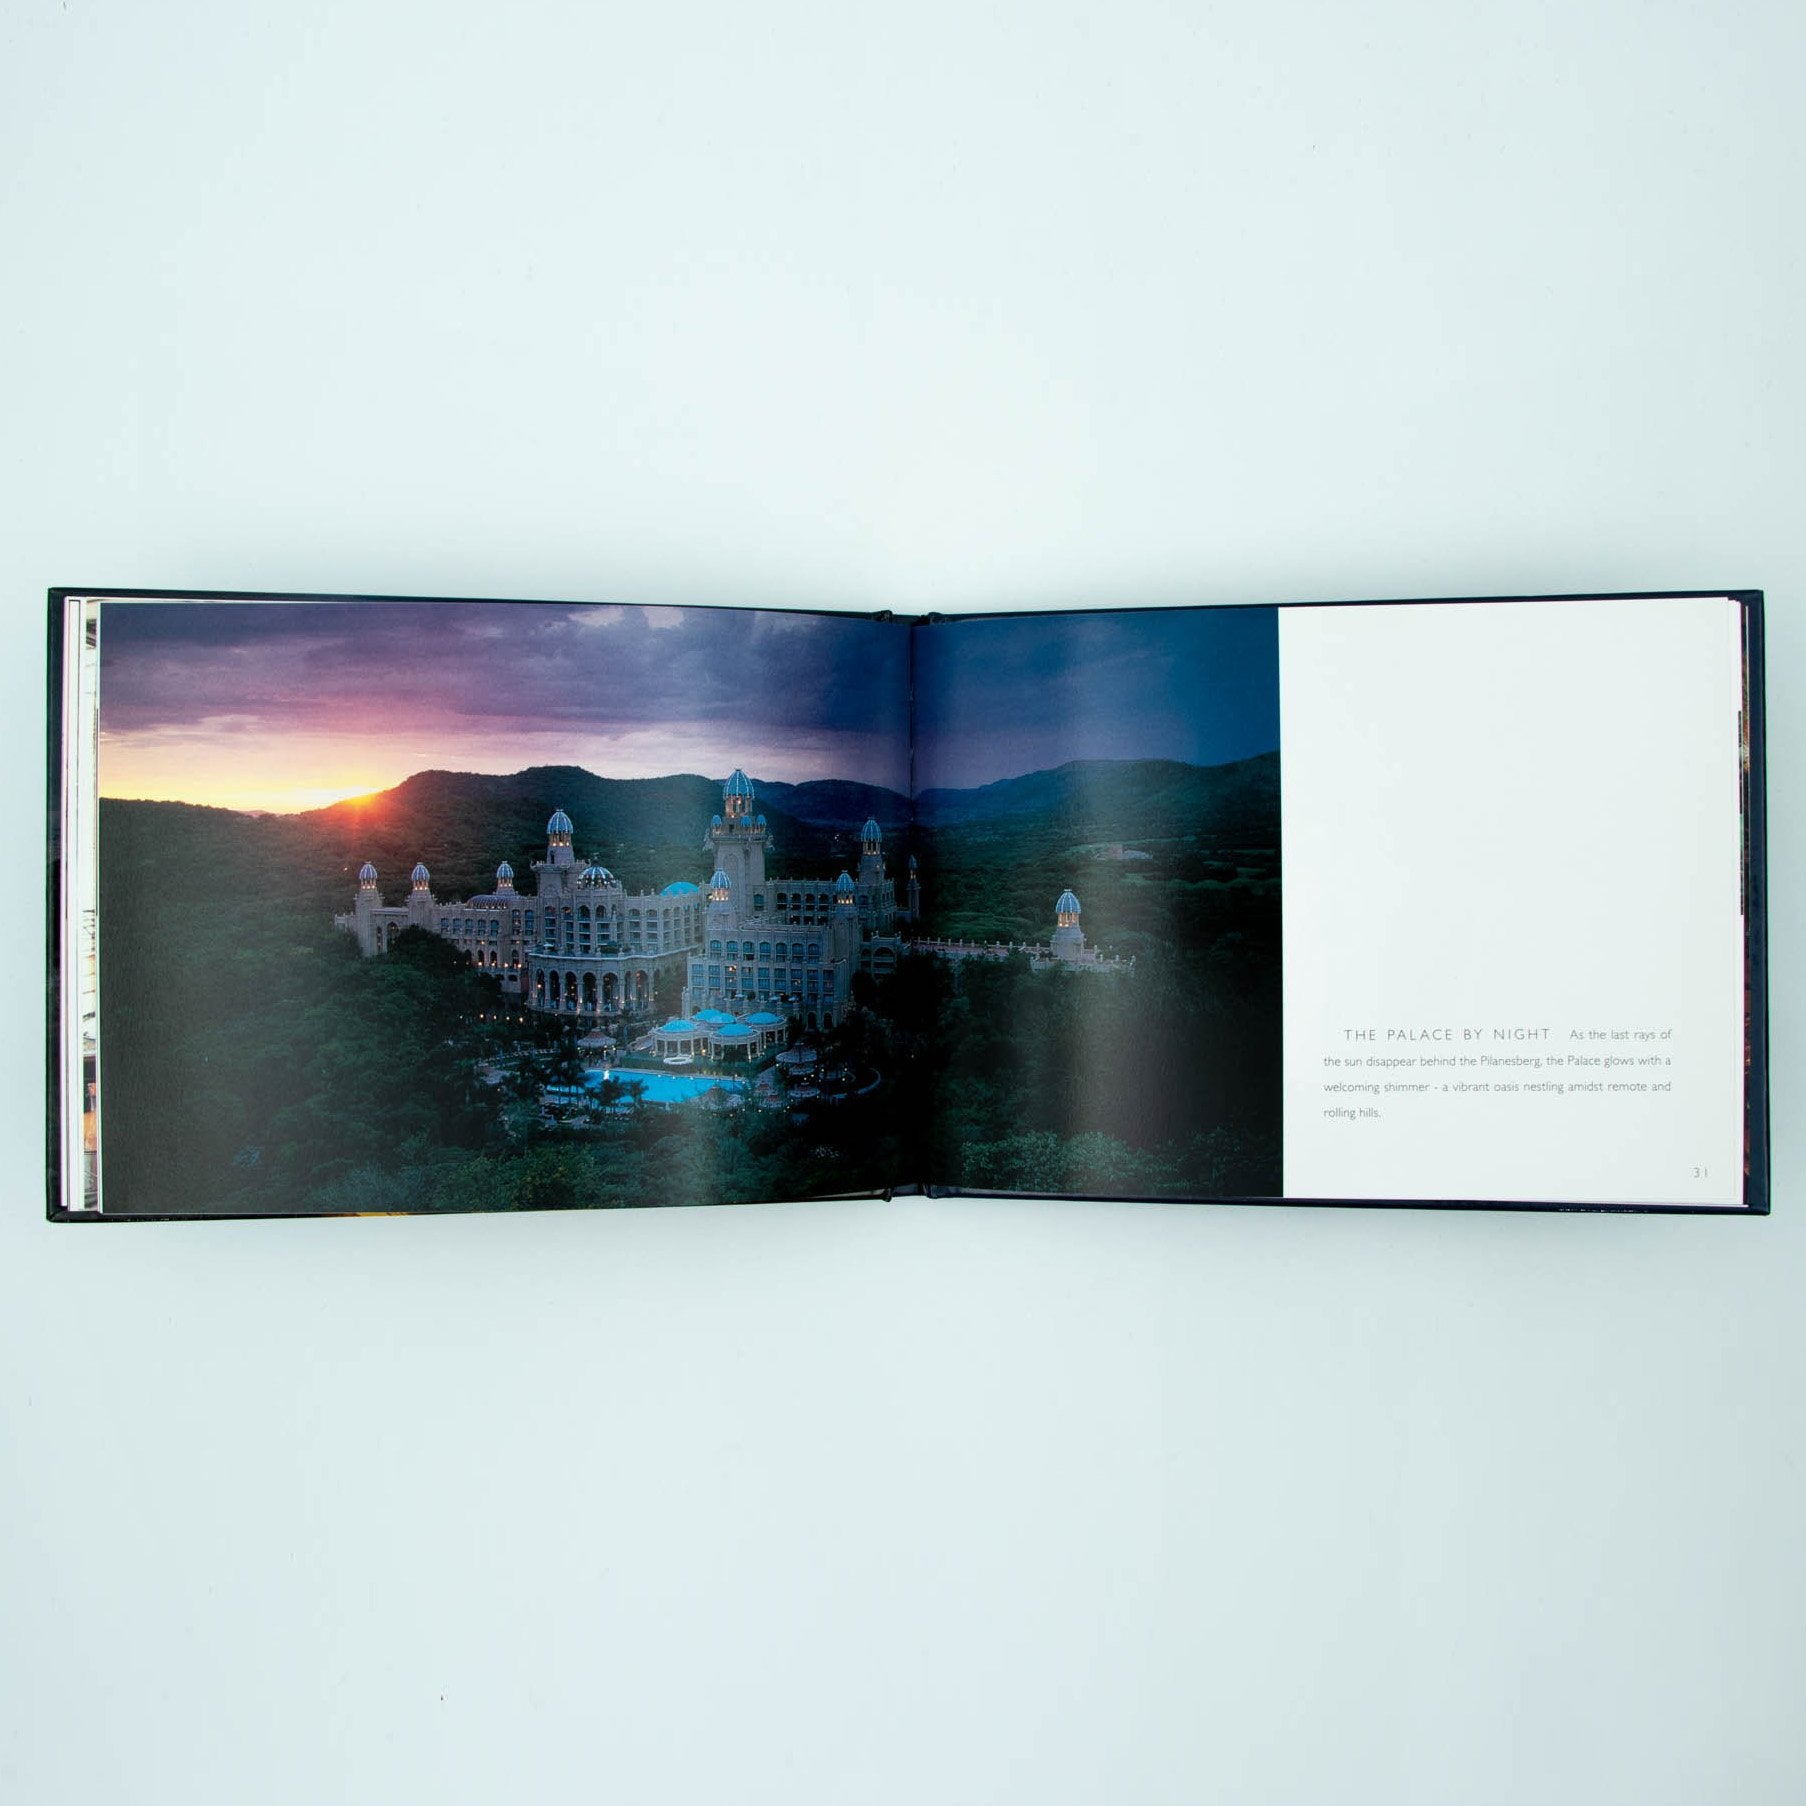 The Lost City at Sun City Hardcover Coffee Table Book